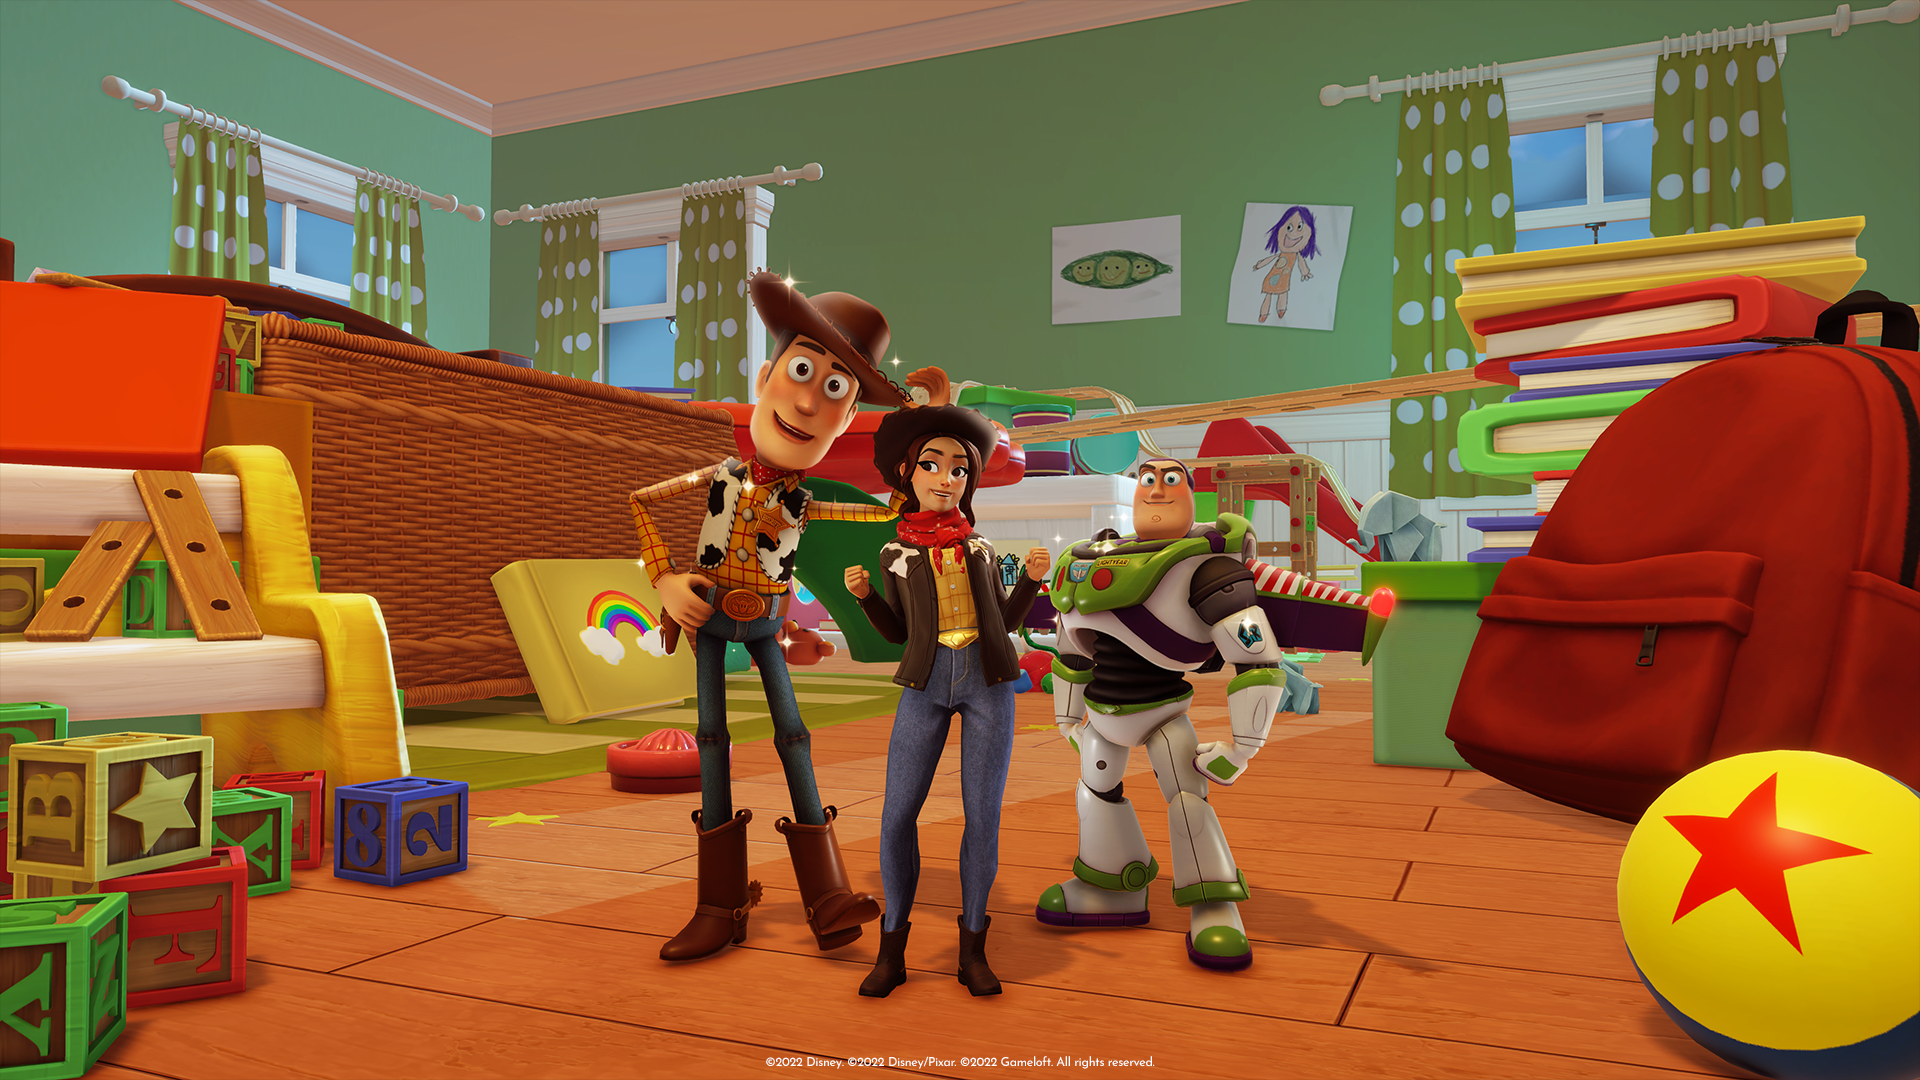 HD wallpaper of Disney Dreamlight Valley characters in a vibrant, colorful toy room setting for desktop background.